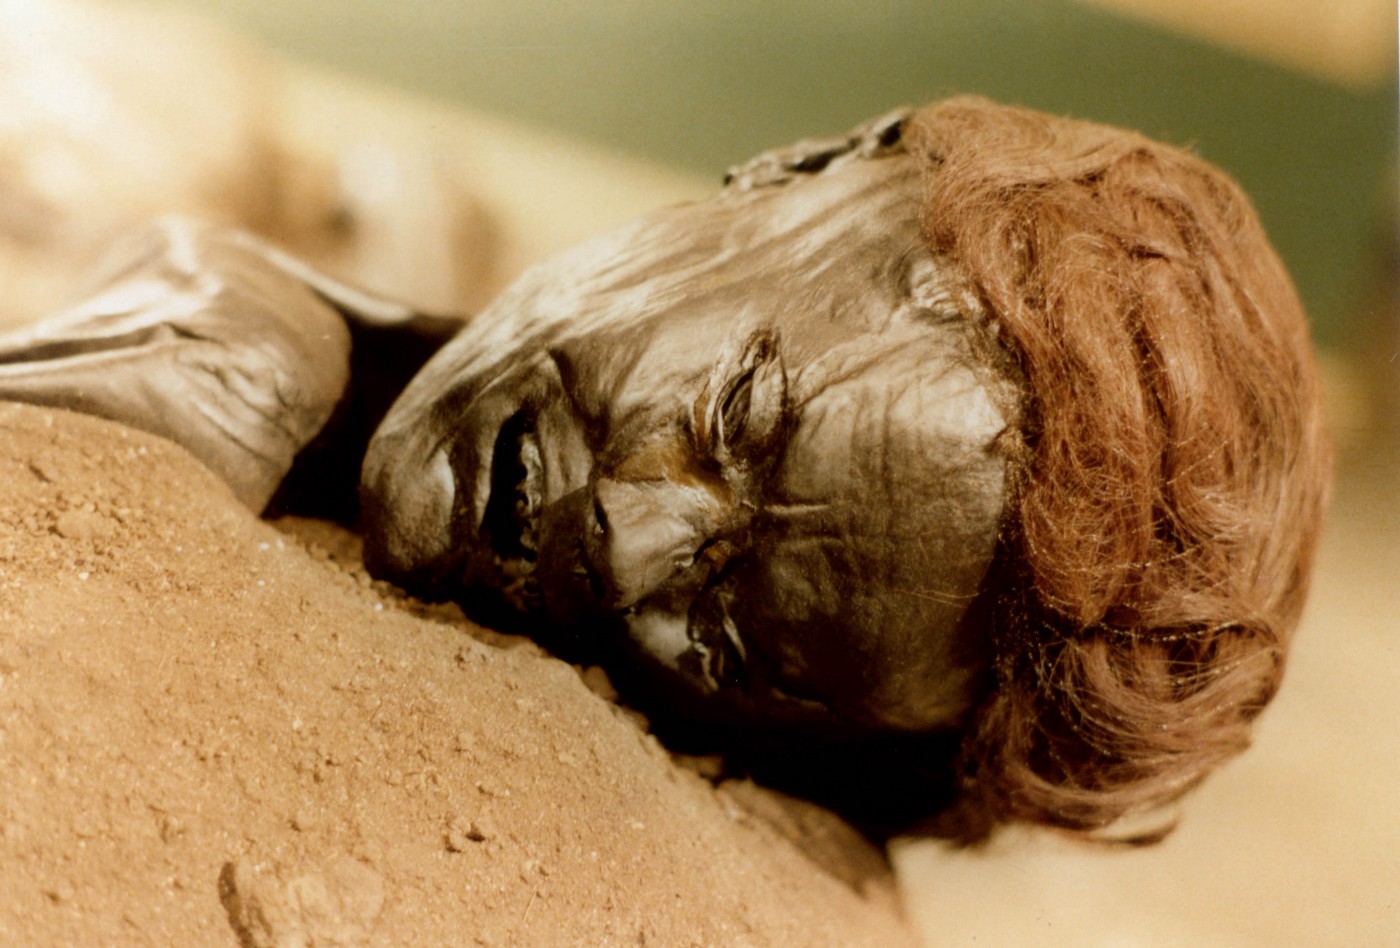 A close up shot of tollund man's face on the sand